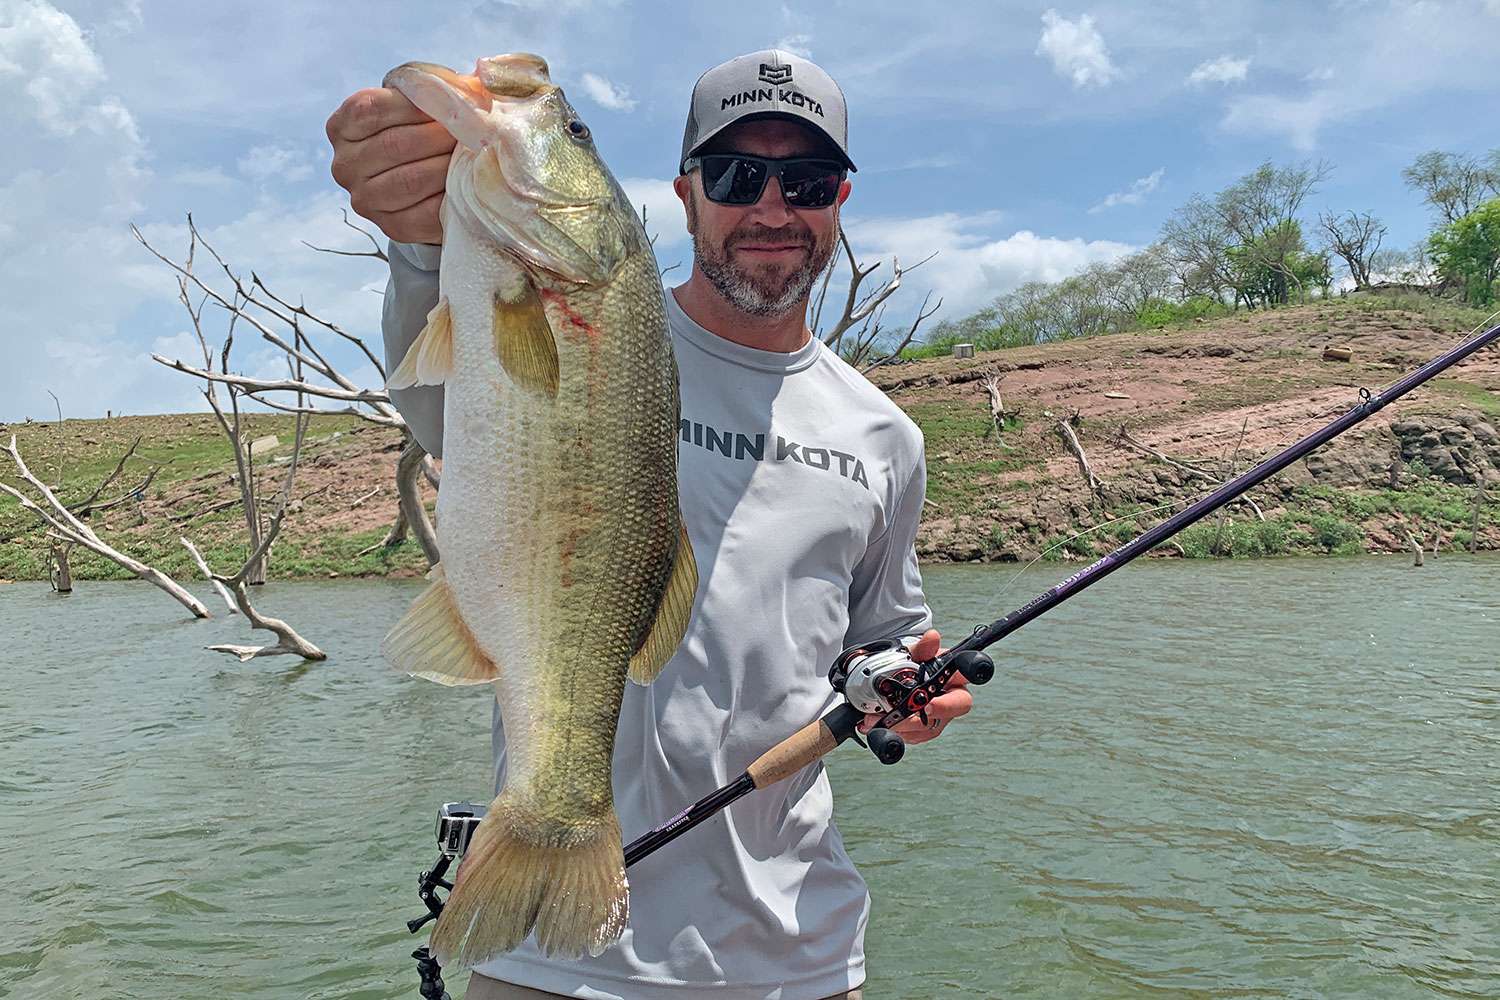 Returning that afternoon with Gunpowder's Ryan Chuckle, the case was made. Big El Salto largemouth bass were certainly nearby.